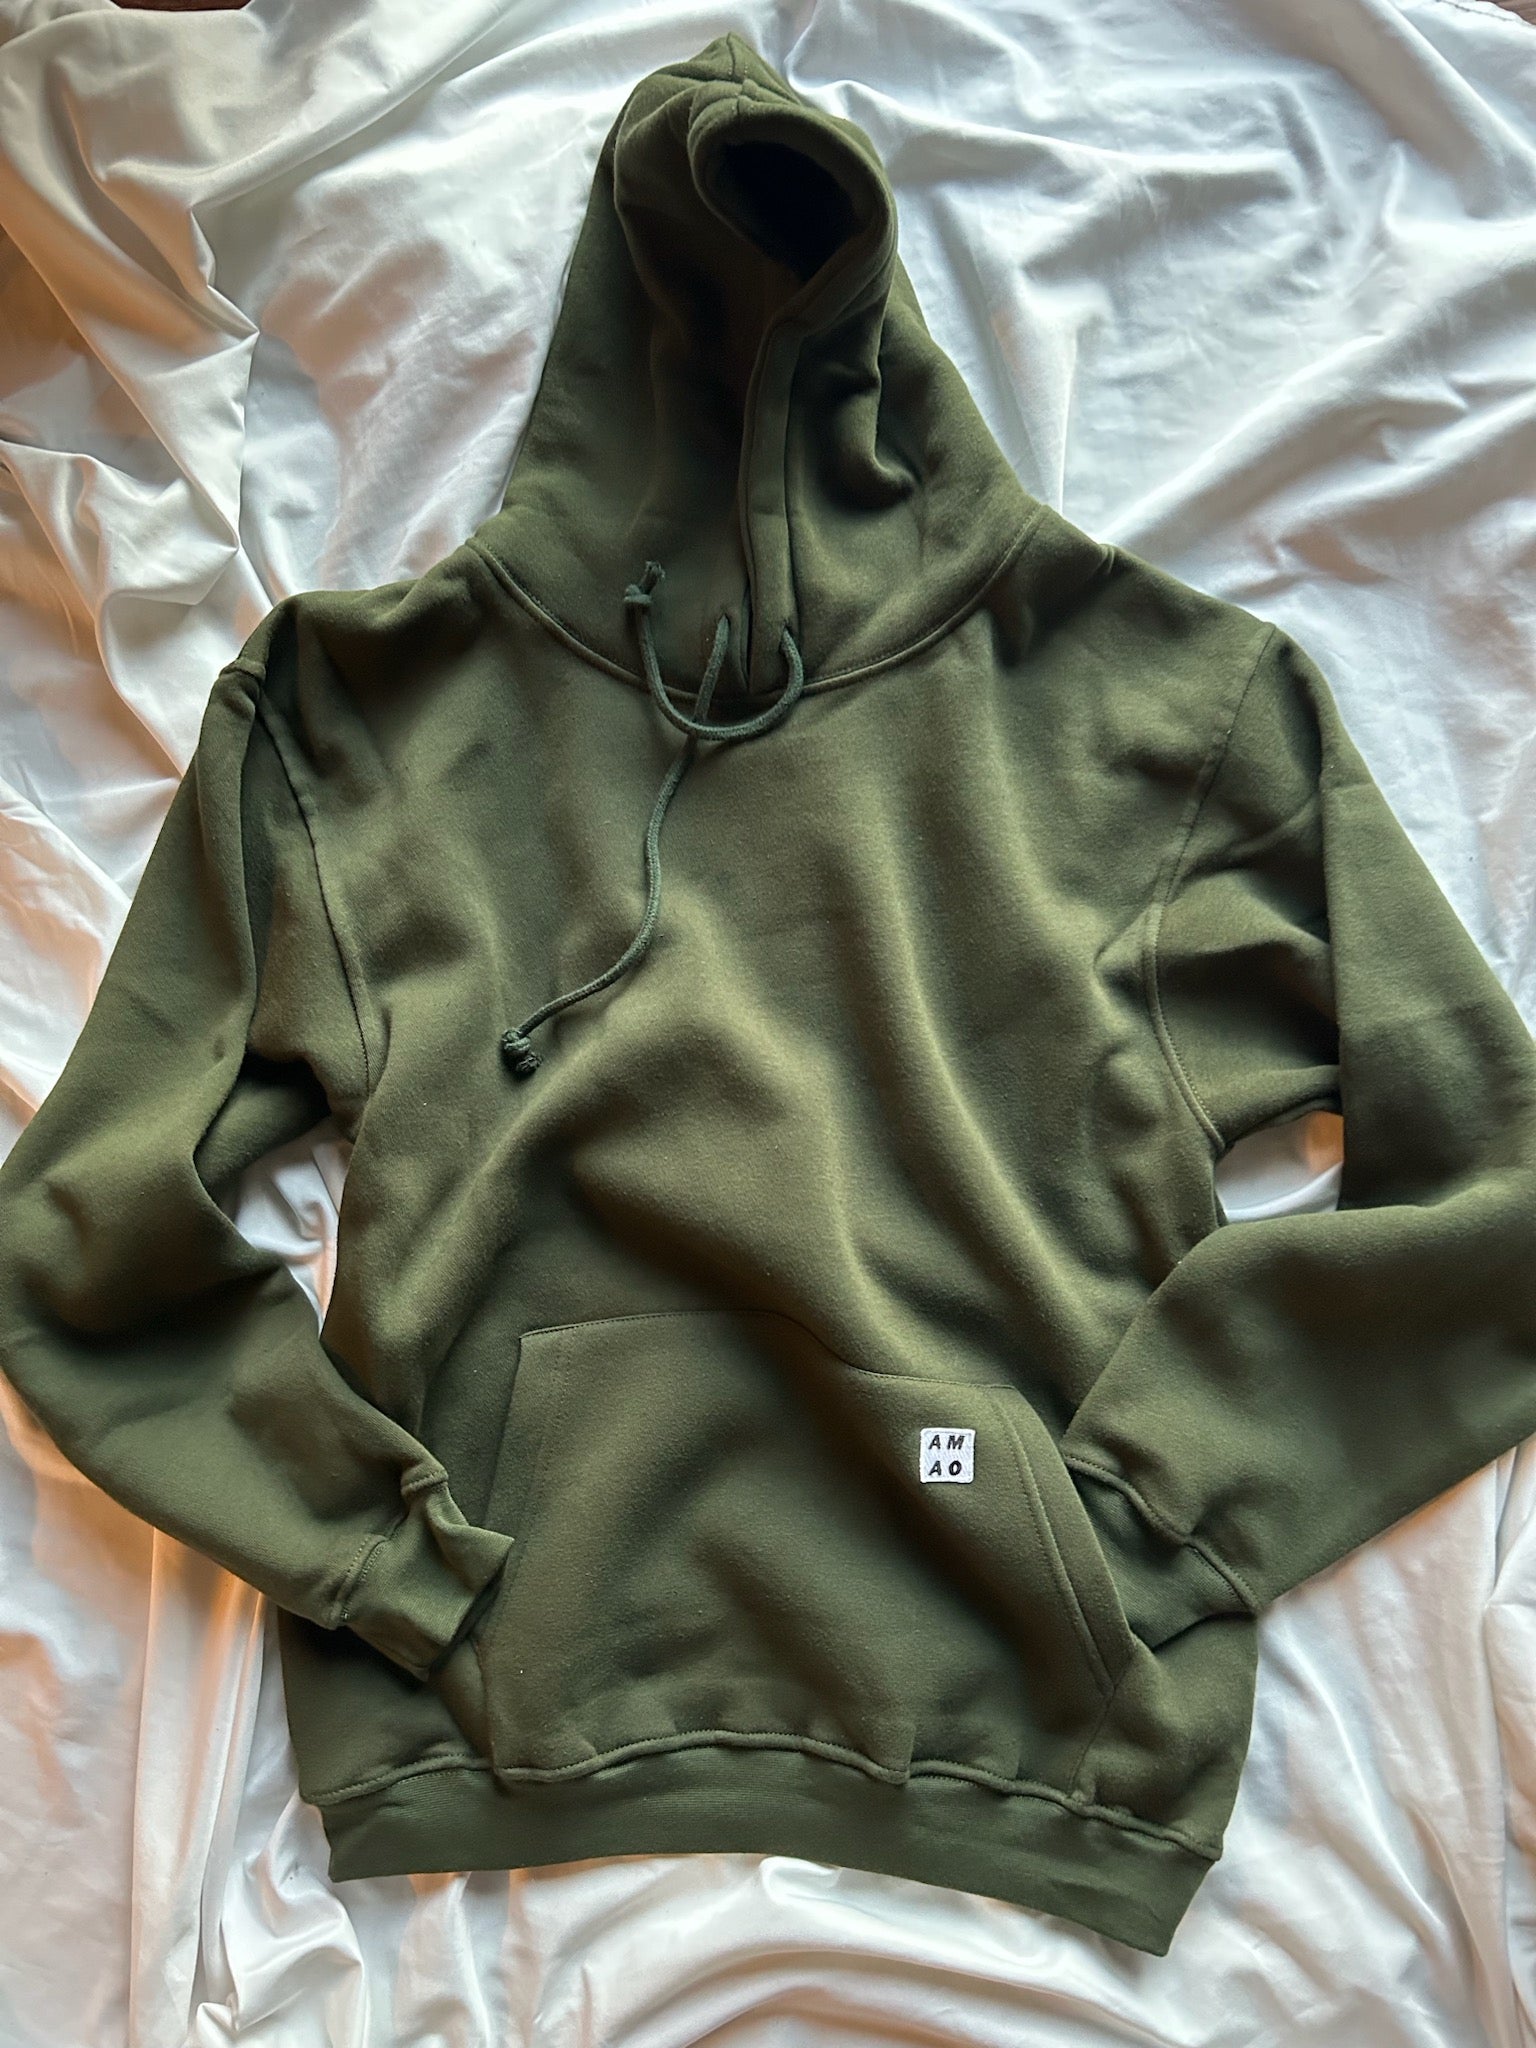 AMAO Classic Hoodie Fleece Unisex - Compare at $179.99 (Made to Order, Allow 2-3 weeks for delivery)